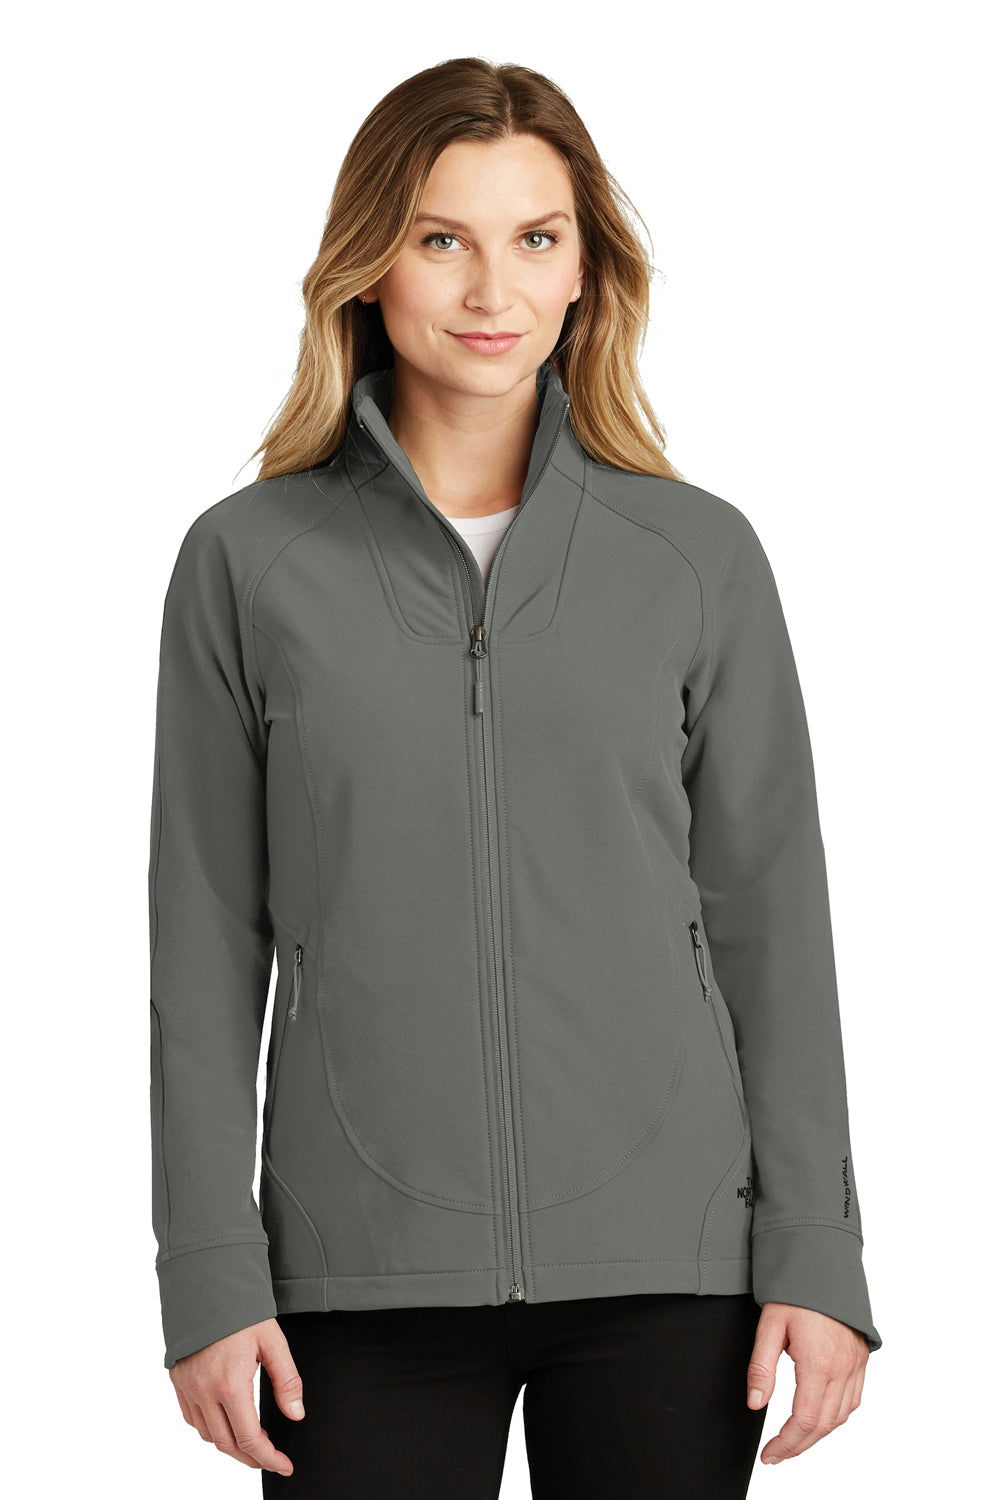 The North Face NF0A3LGW Womens Tech Wind & Water Resistant Full Zip Jacket Asphalt Grey Front